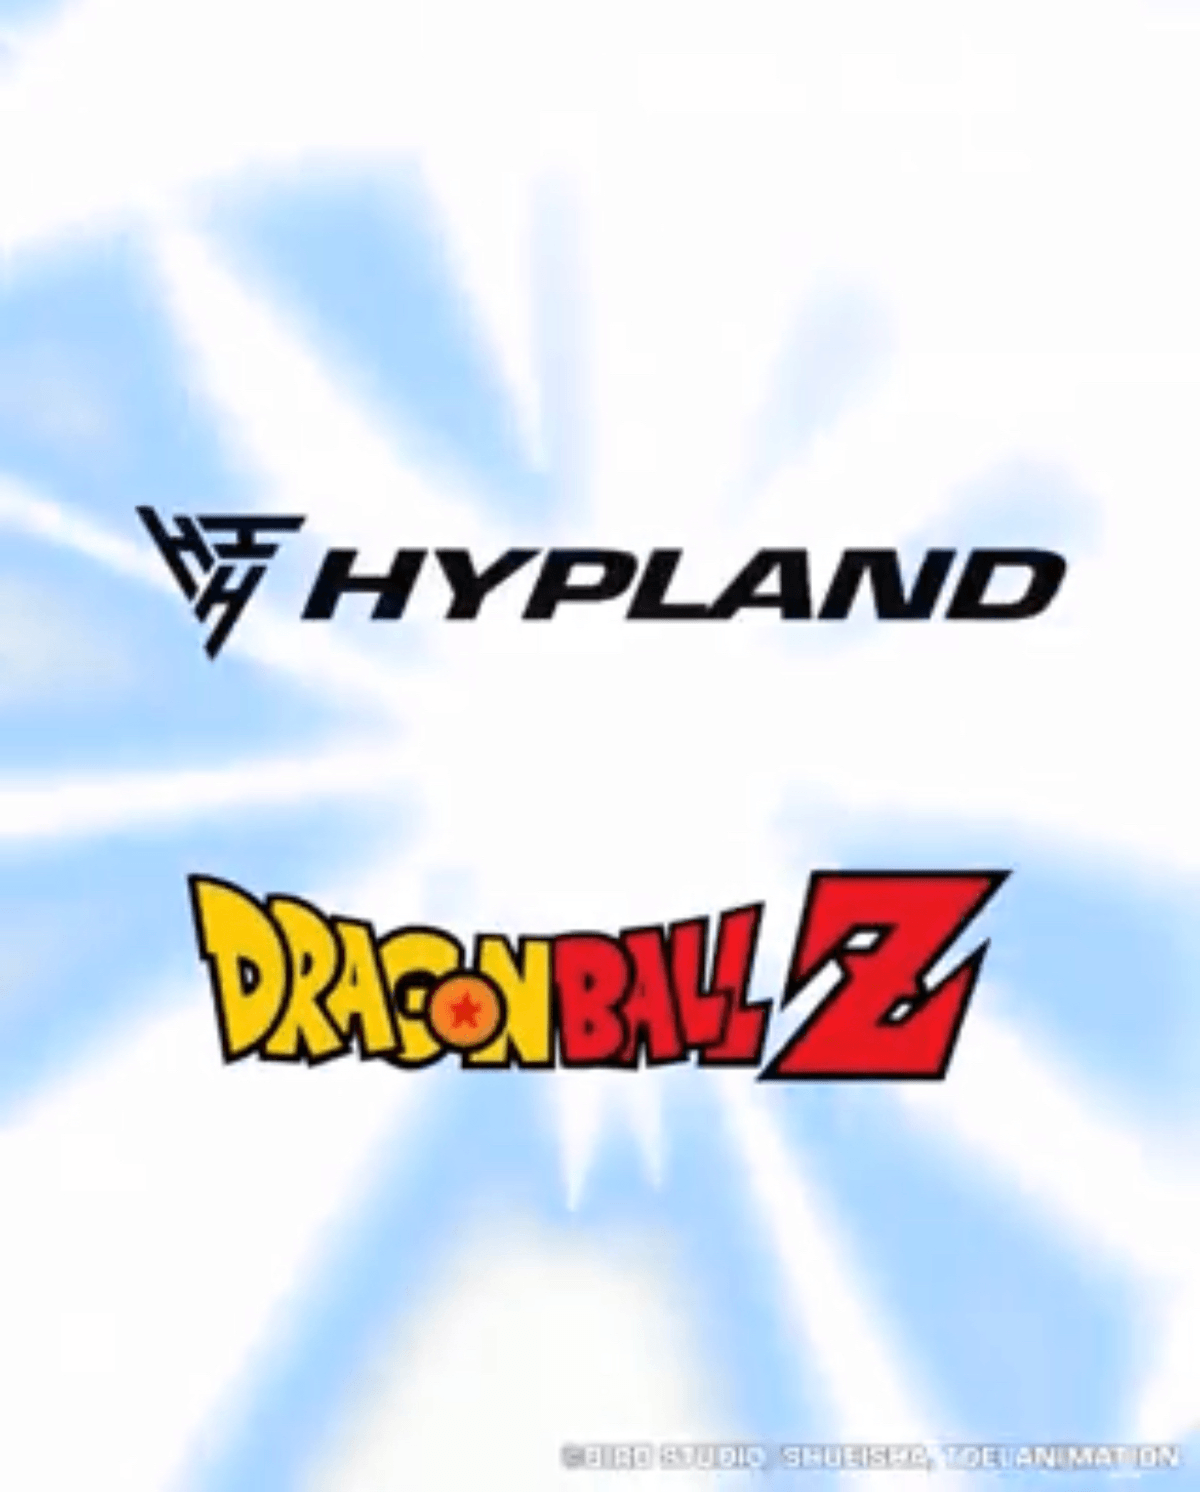 Hypland And DragonBall Z Are Once Again Joining Forces For A Capsule Collection